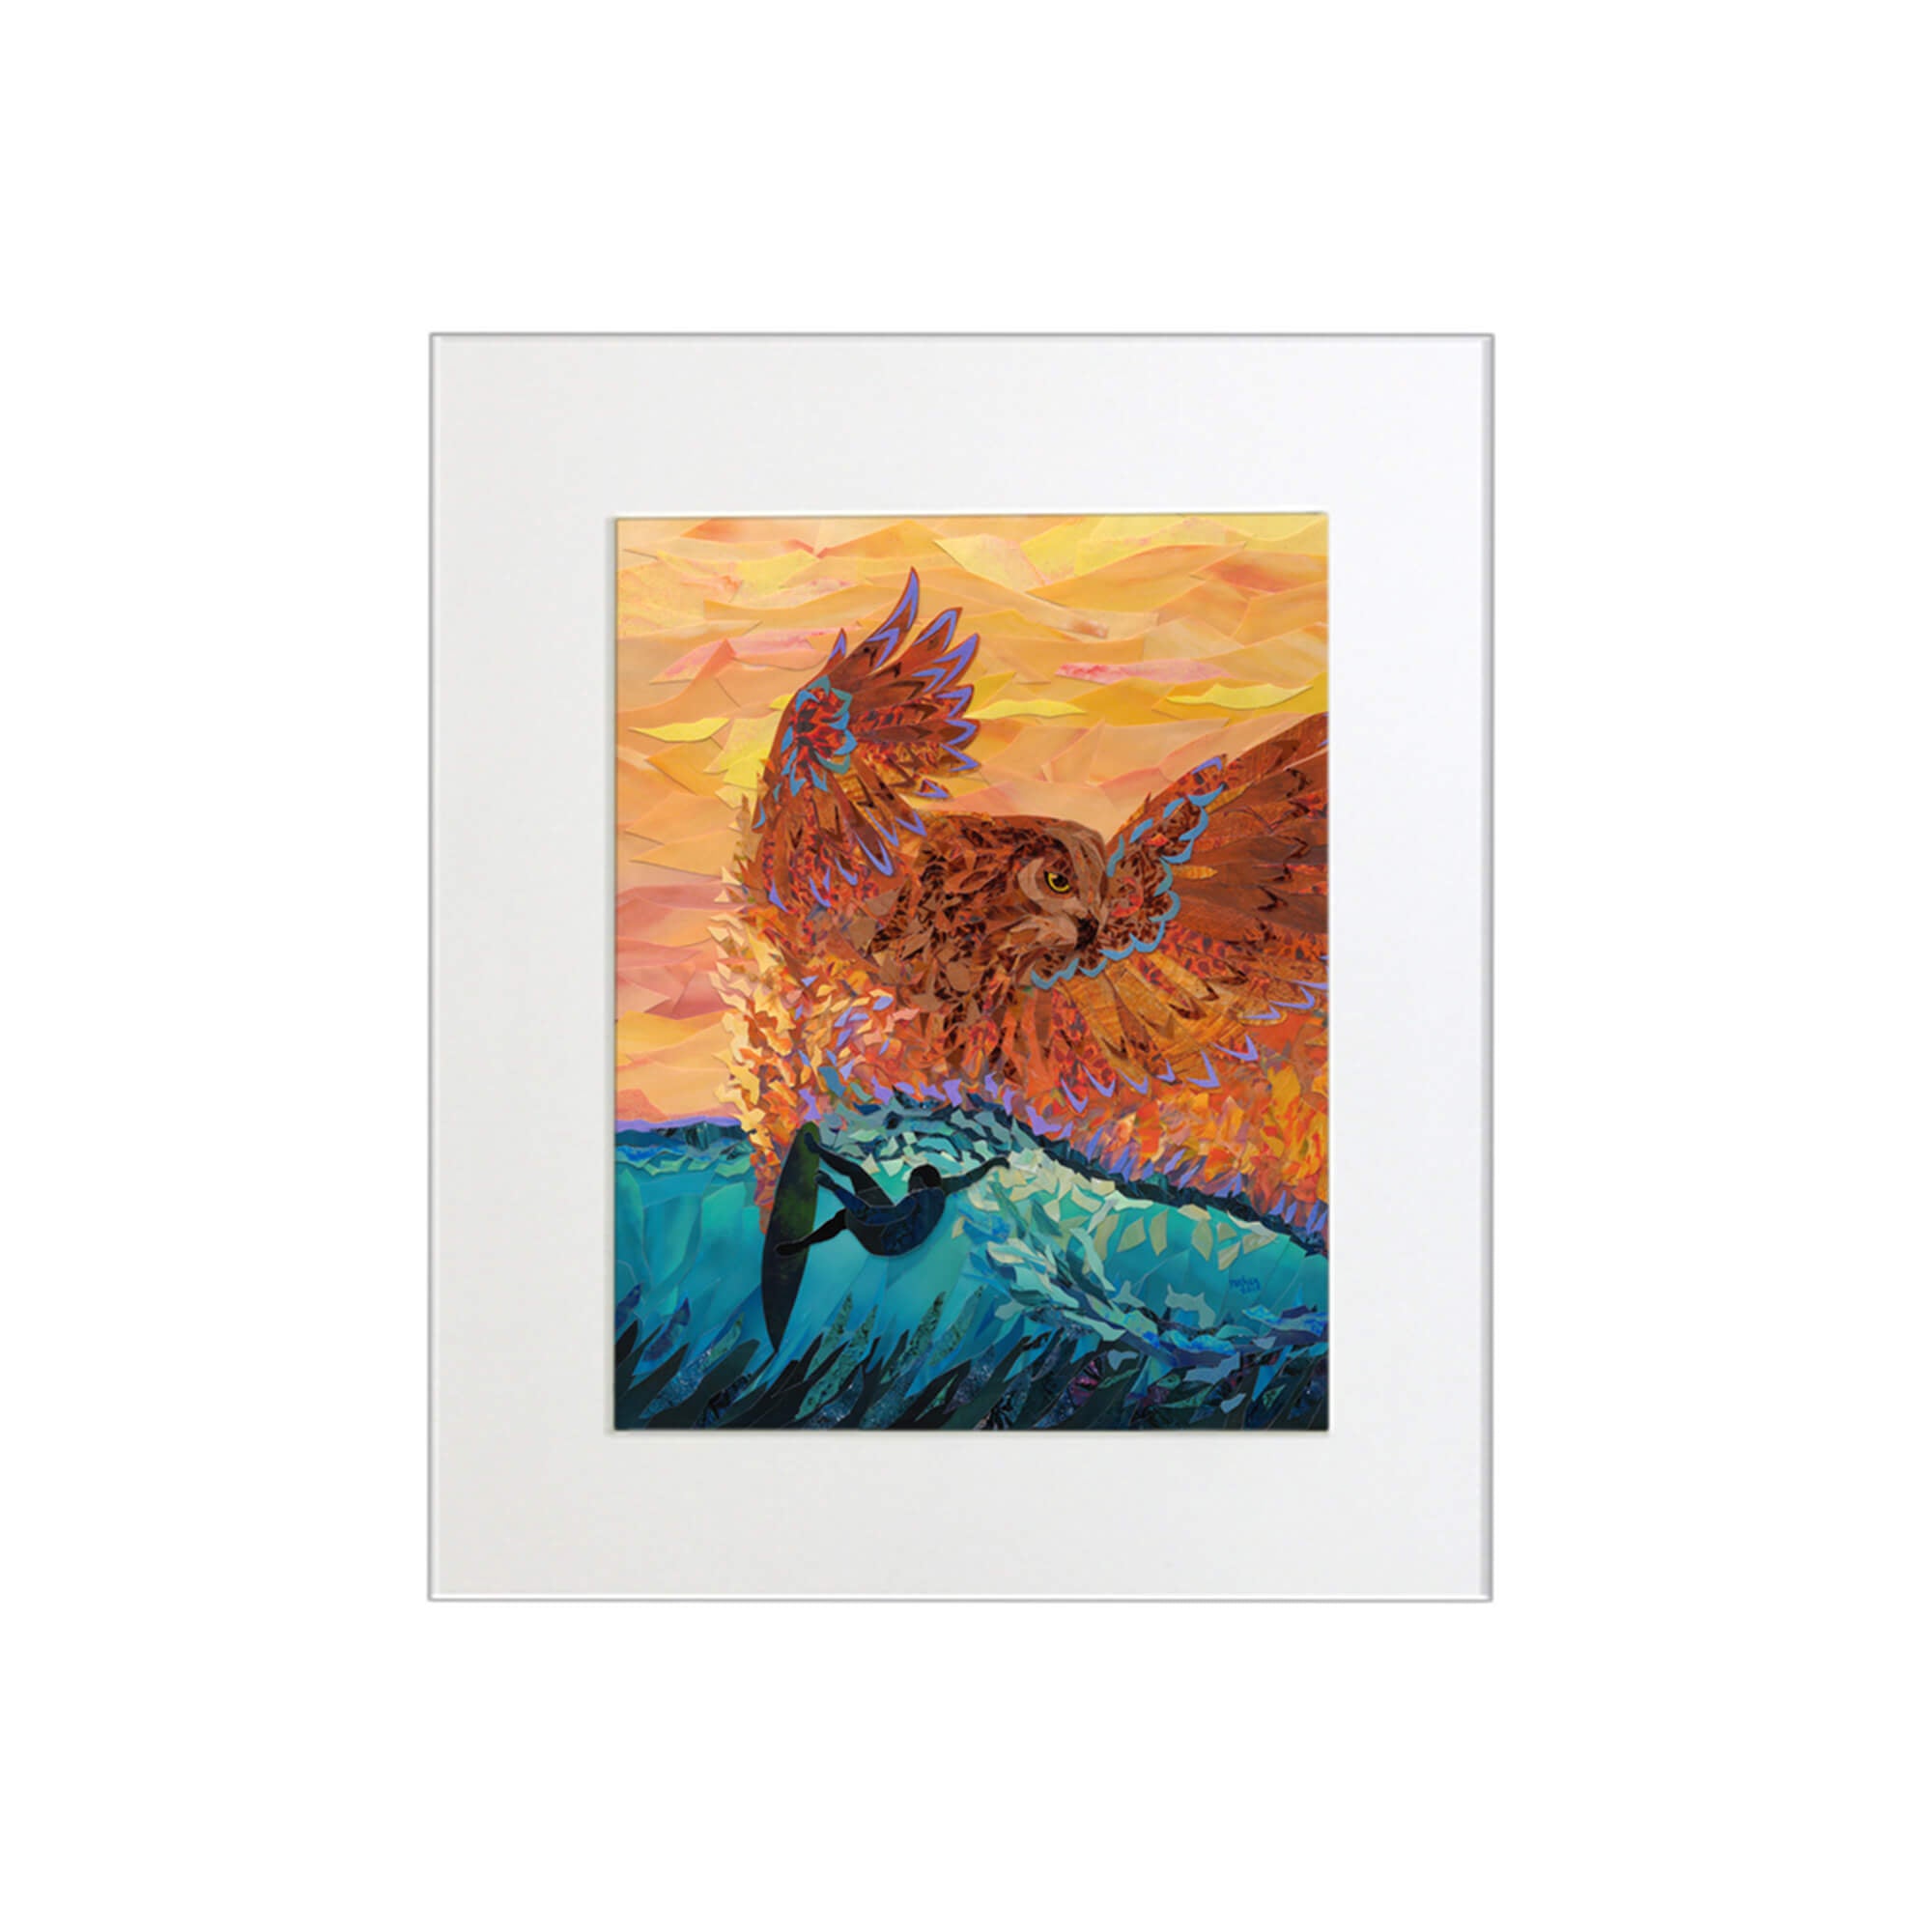 A matted art print featuring a collage of a surfer riding the epic wave of Hawaii and a vibrant orange-hued owl by Hawaii artist Patrick Parker